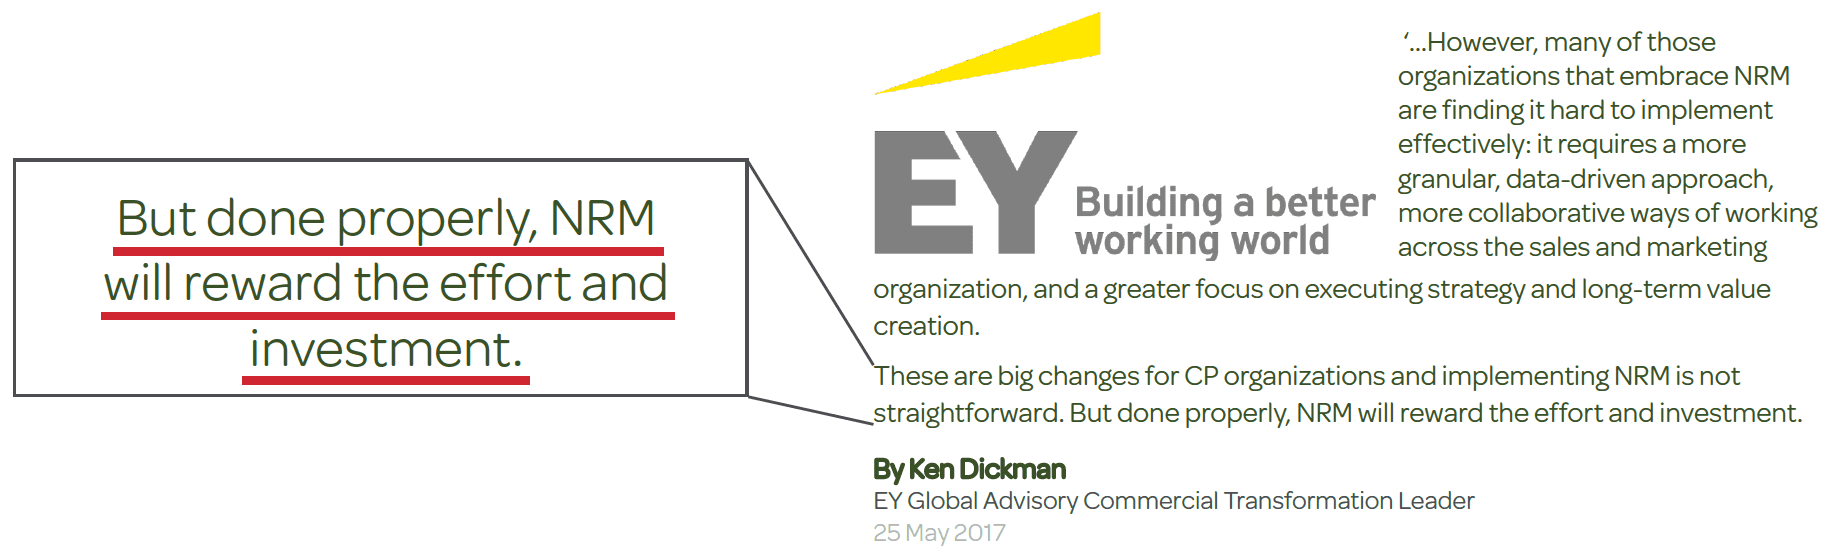 Quote from Ken Dickman of EY about NRM Net Revenue Management and reward